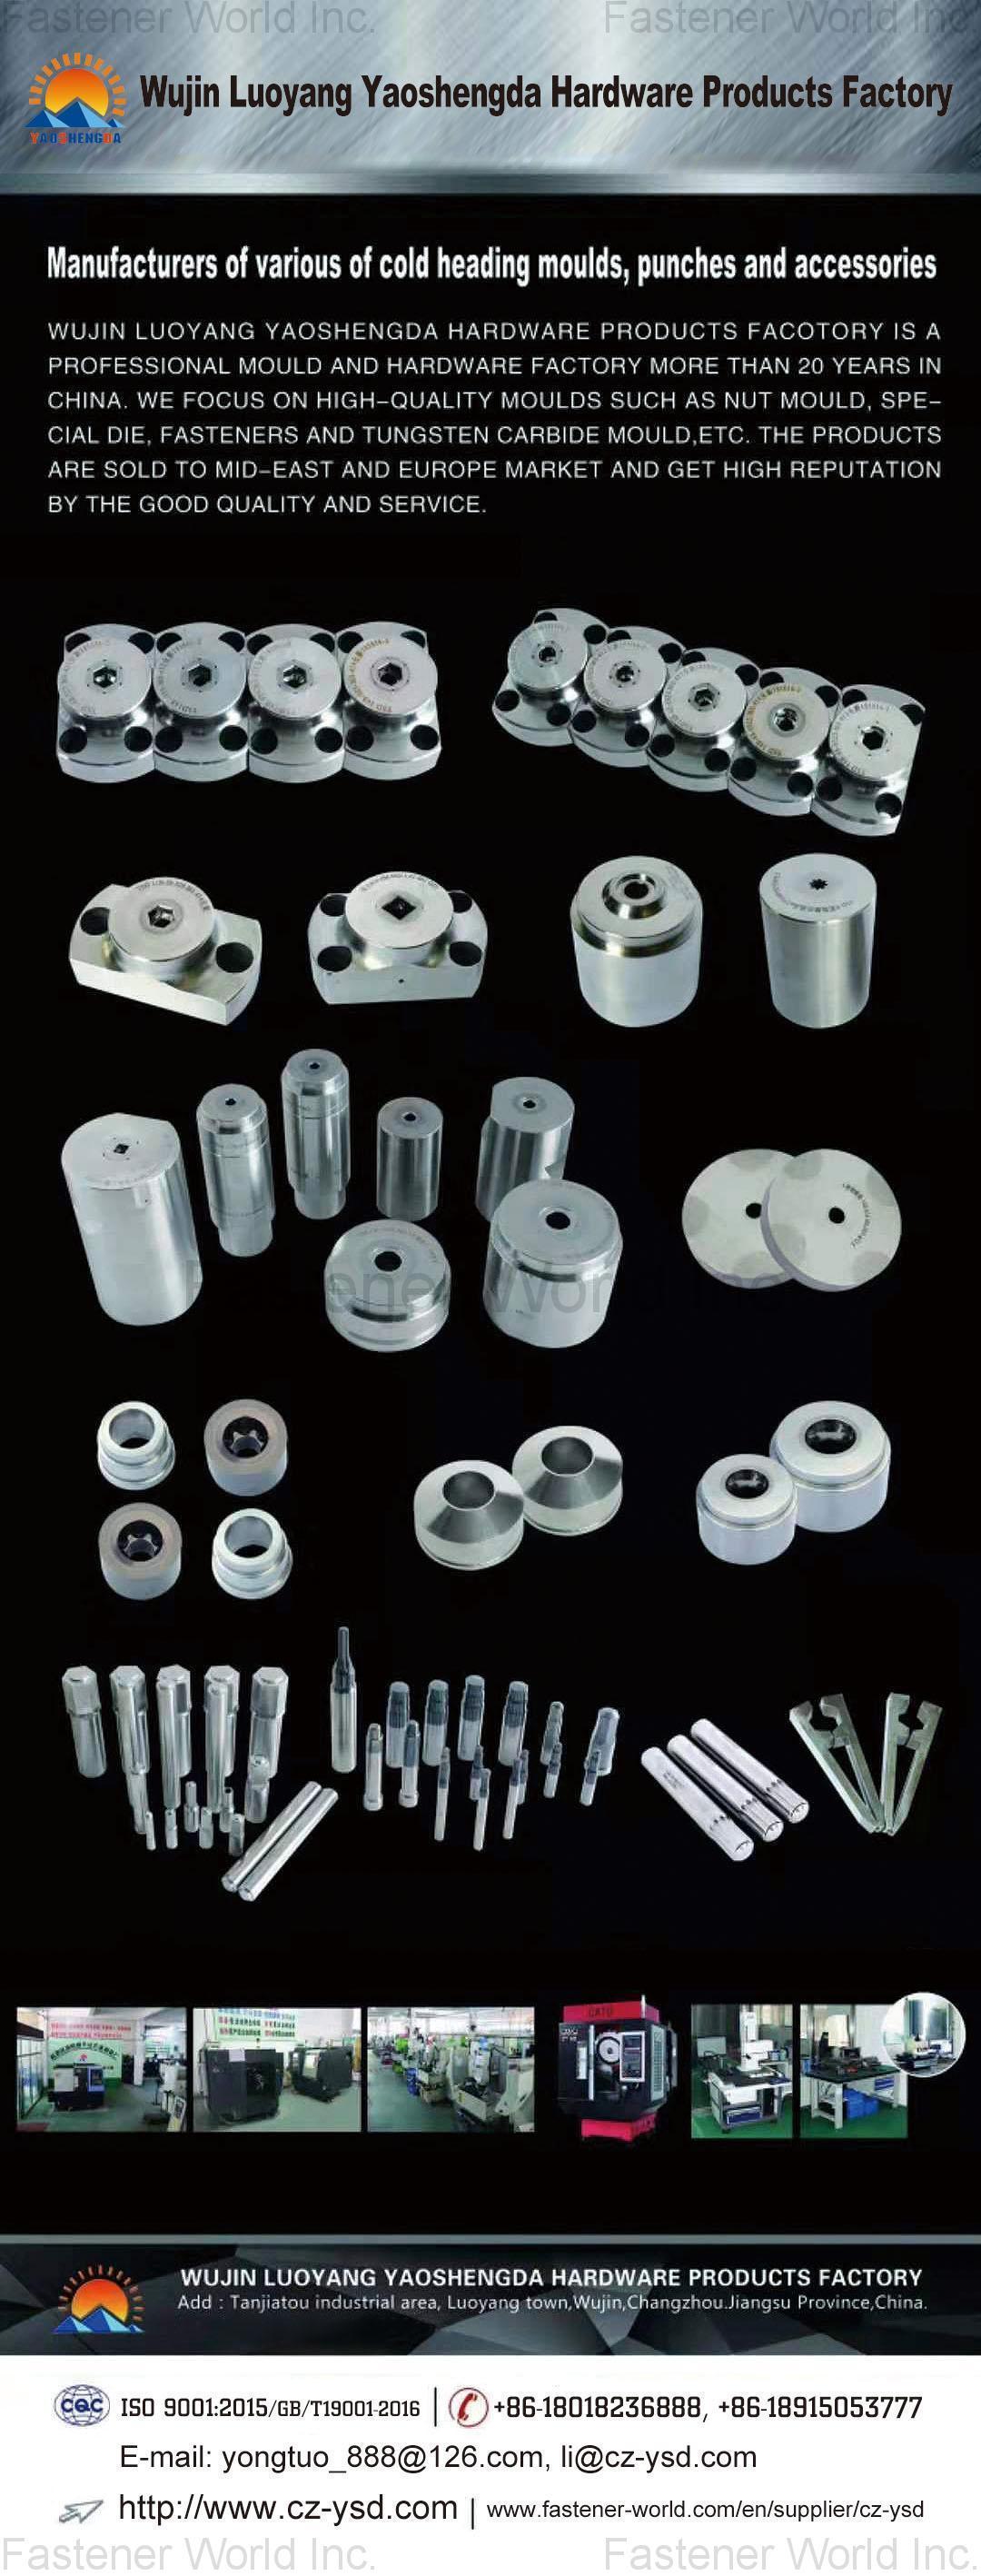 WUJIN LUOYANG YAOSHENGDA HARDWARE PRODUCTS FACTORY , Cold Heading Moulds, Punches, Nut Moulds, Special Dies, Fasteners, Tungsten Carbide Mould , Molds & Dies